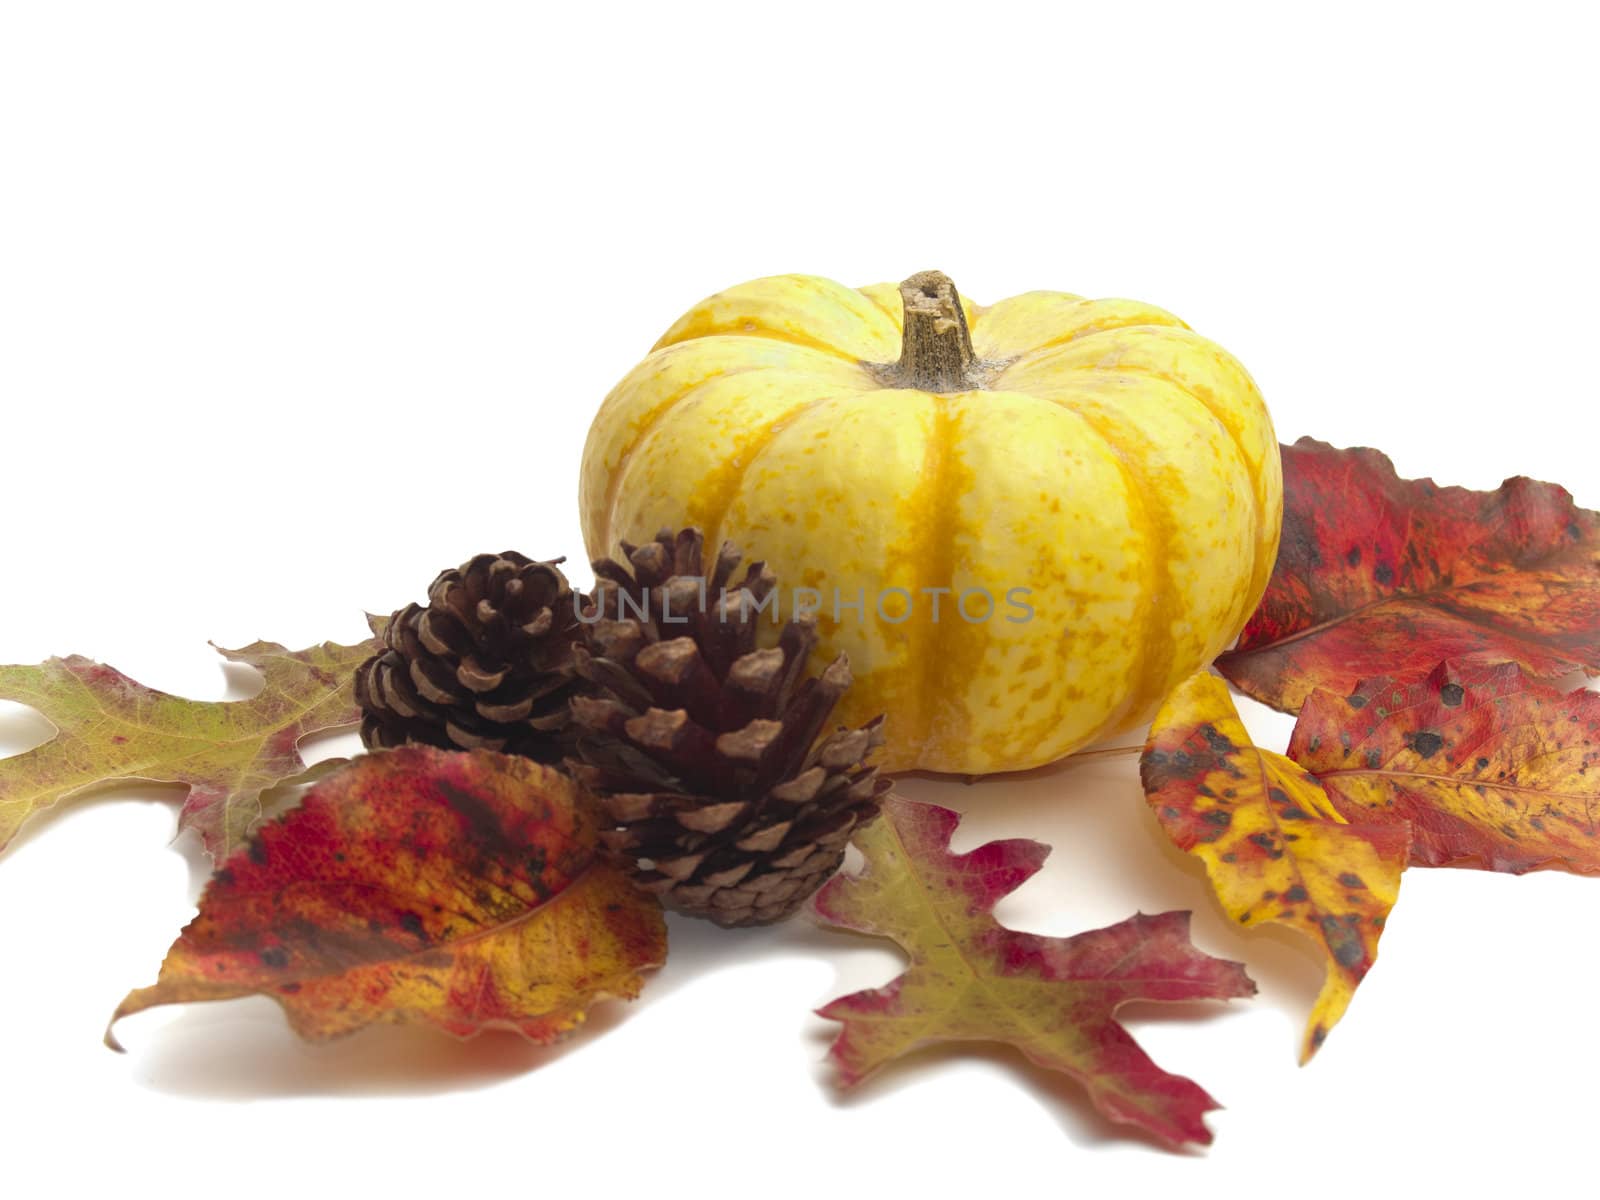 Still-life arrangement for Autumn of Thanksgiving holiday with small yellow pumpkin, real multi-colored Fall leaves, and pine cones isolated on white background.